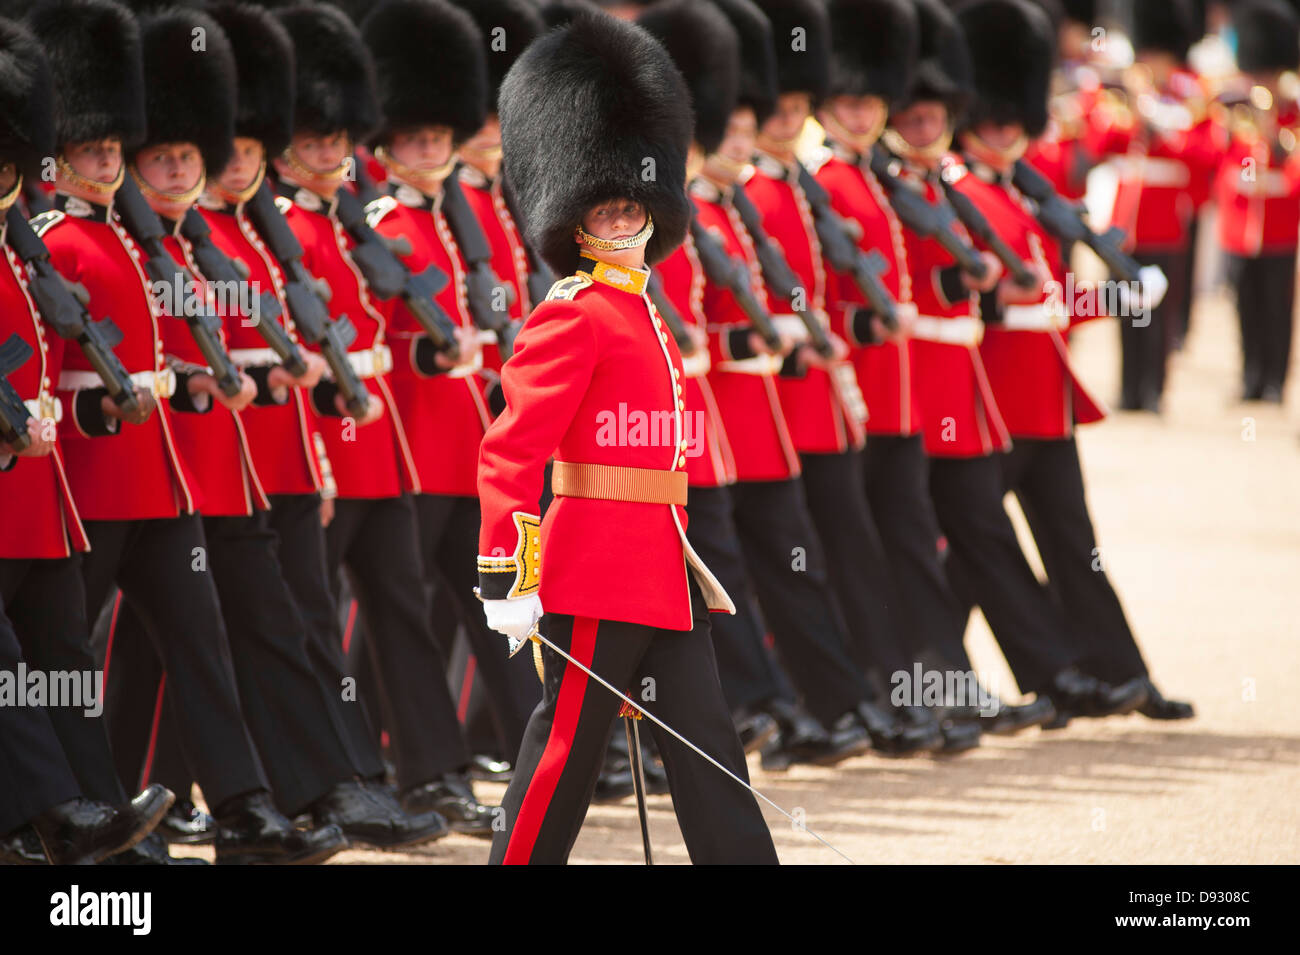 The Colonel’s Review of Trooping the Colour at Horse Guards Parade in London, UK with Guards marching. Stock Photo